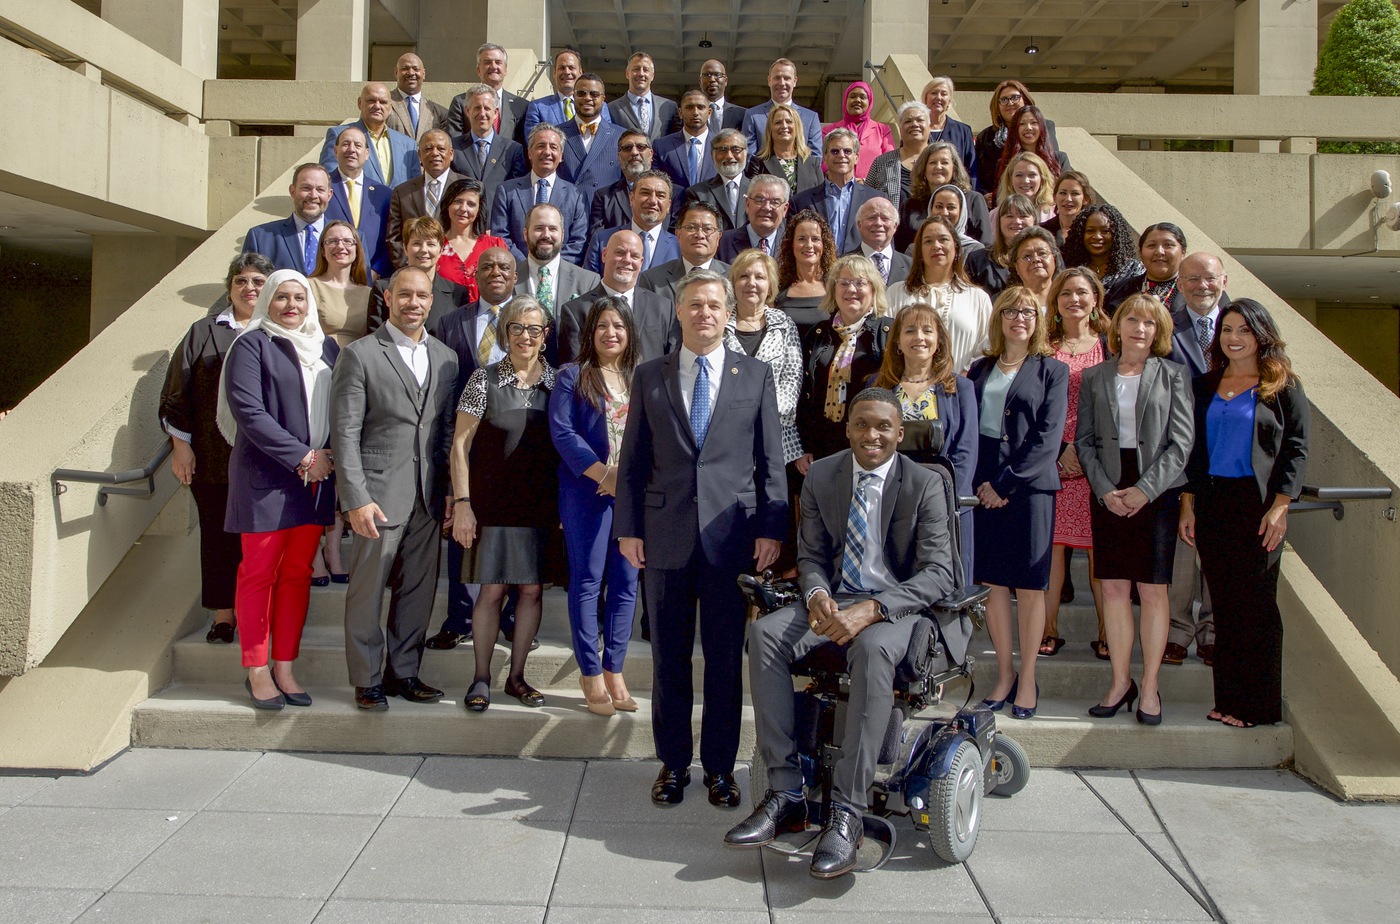 Group photograph of the 2018 Director’s Community Award recipients with Director Christopher Wray at FBI Headquarters on May 3, 2019.